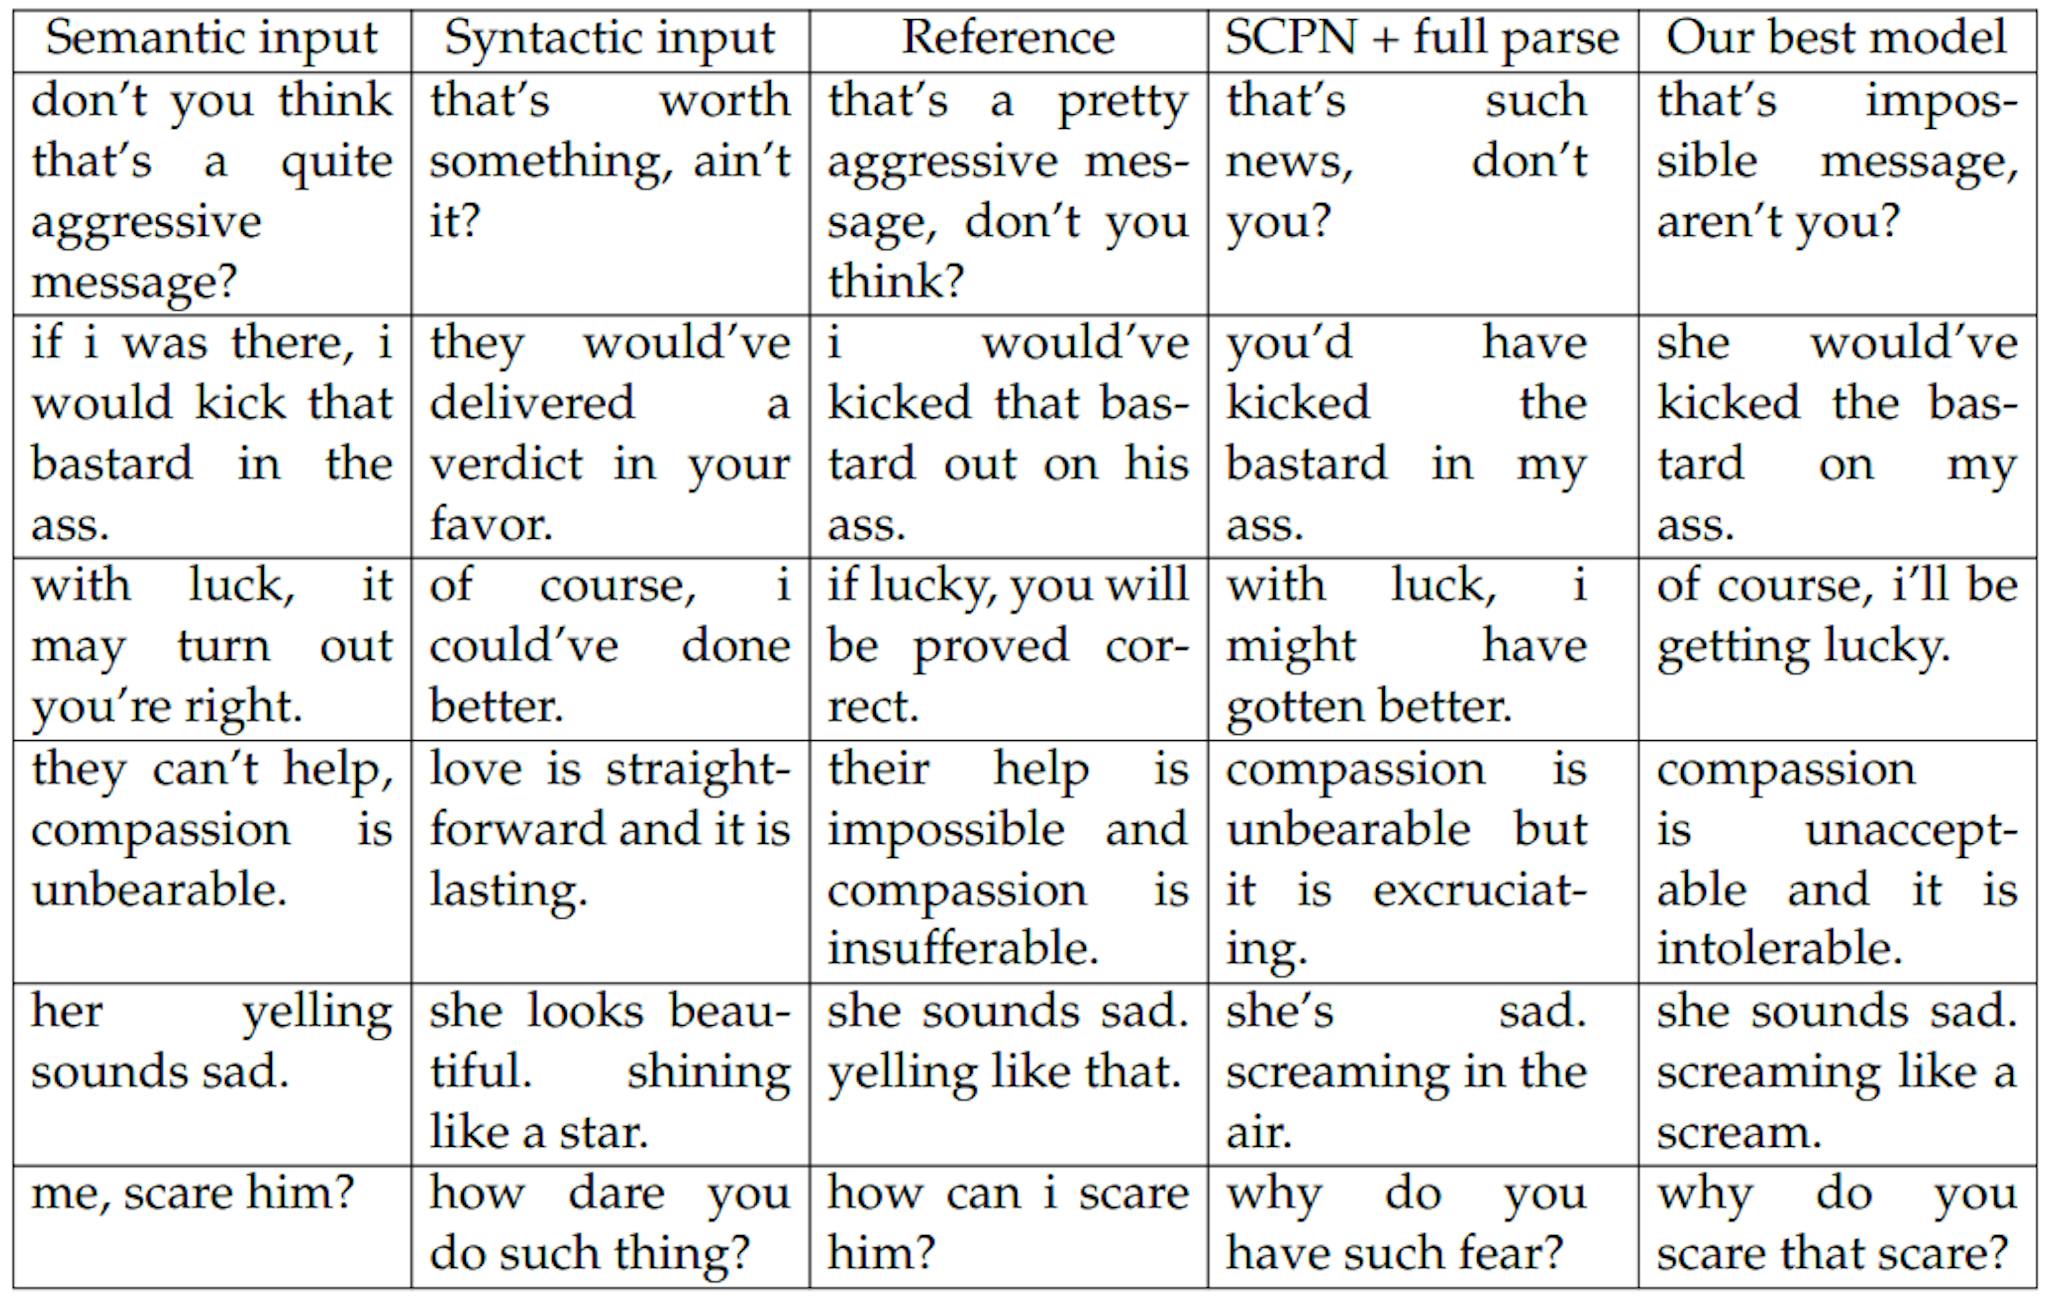 Table 5.13: Examples of generated sentences.